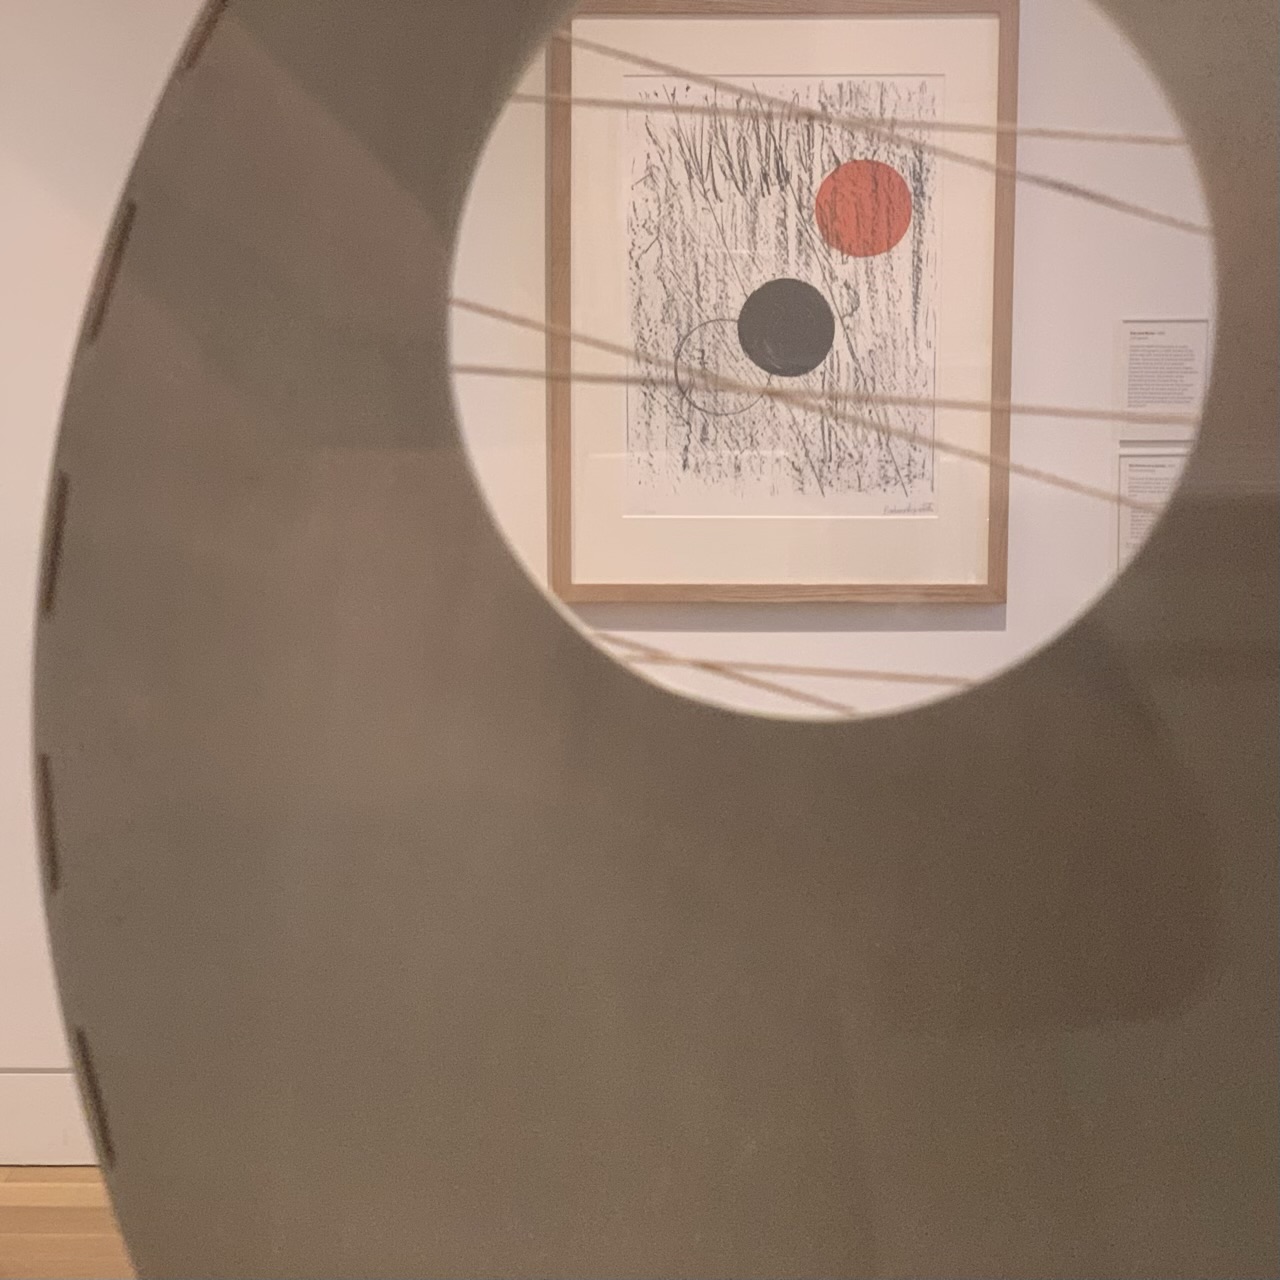 Looking through a circular hole in a Barbara Hepworth sculpture and a picture by the same artist.